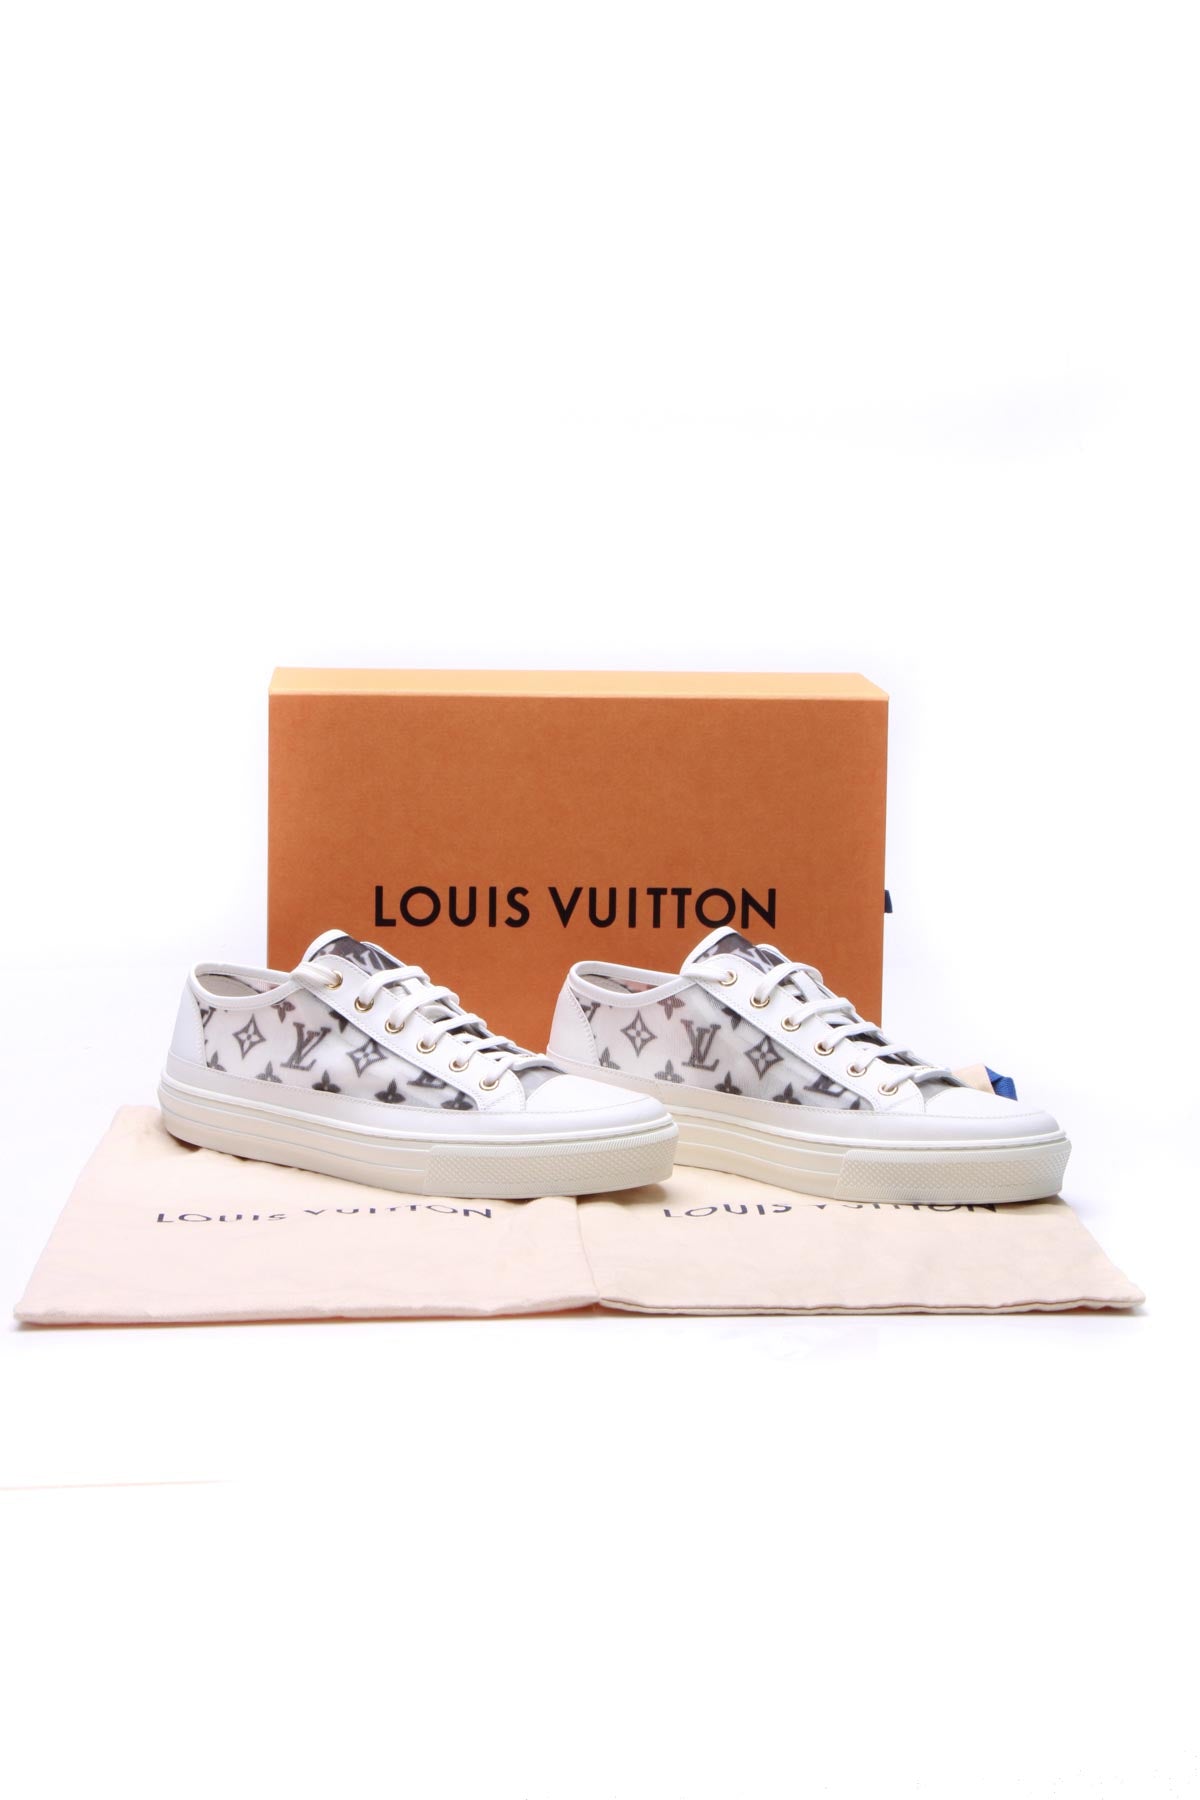 Louis Vuitton, Shoes, Lv Trainer Red White Size 43 Vnds